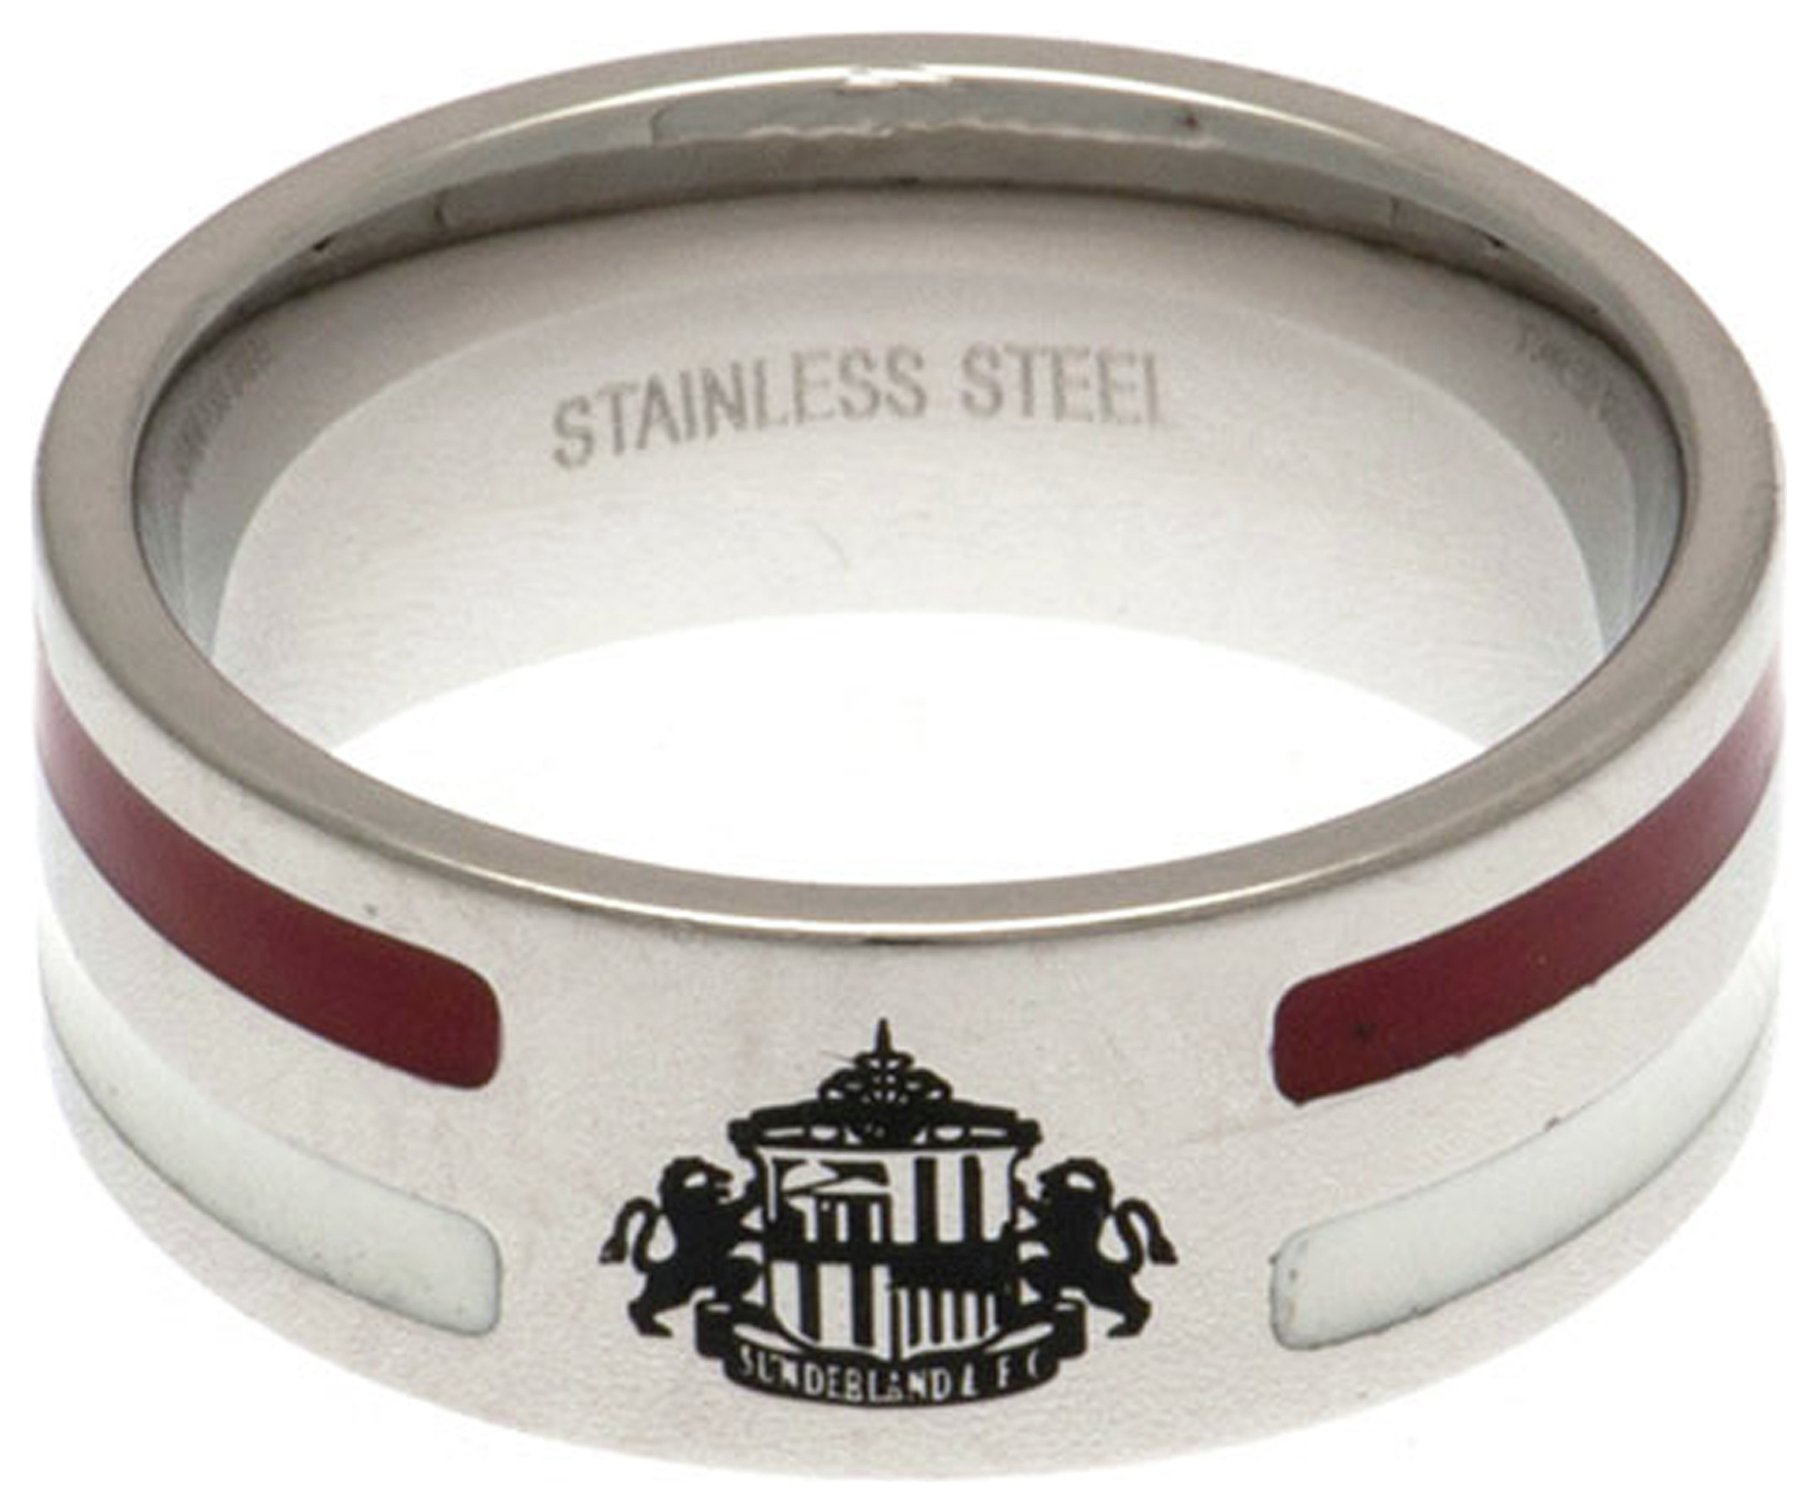 Stainless Steel Sunderland Striped Ring - Size X